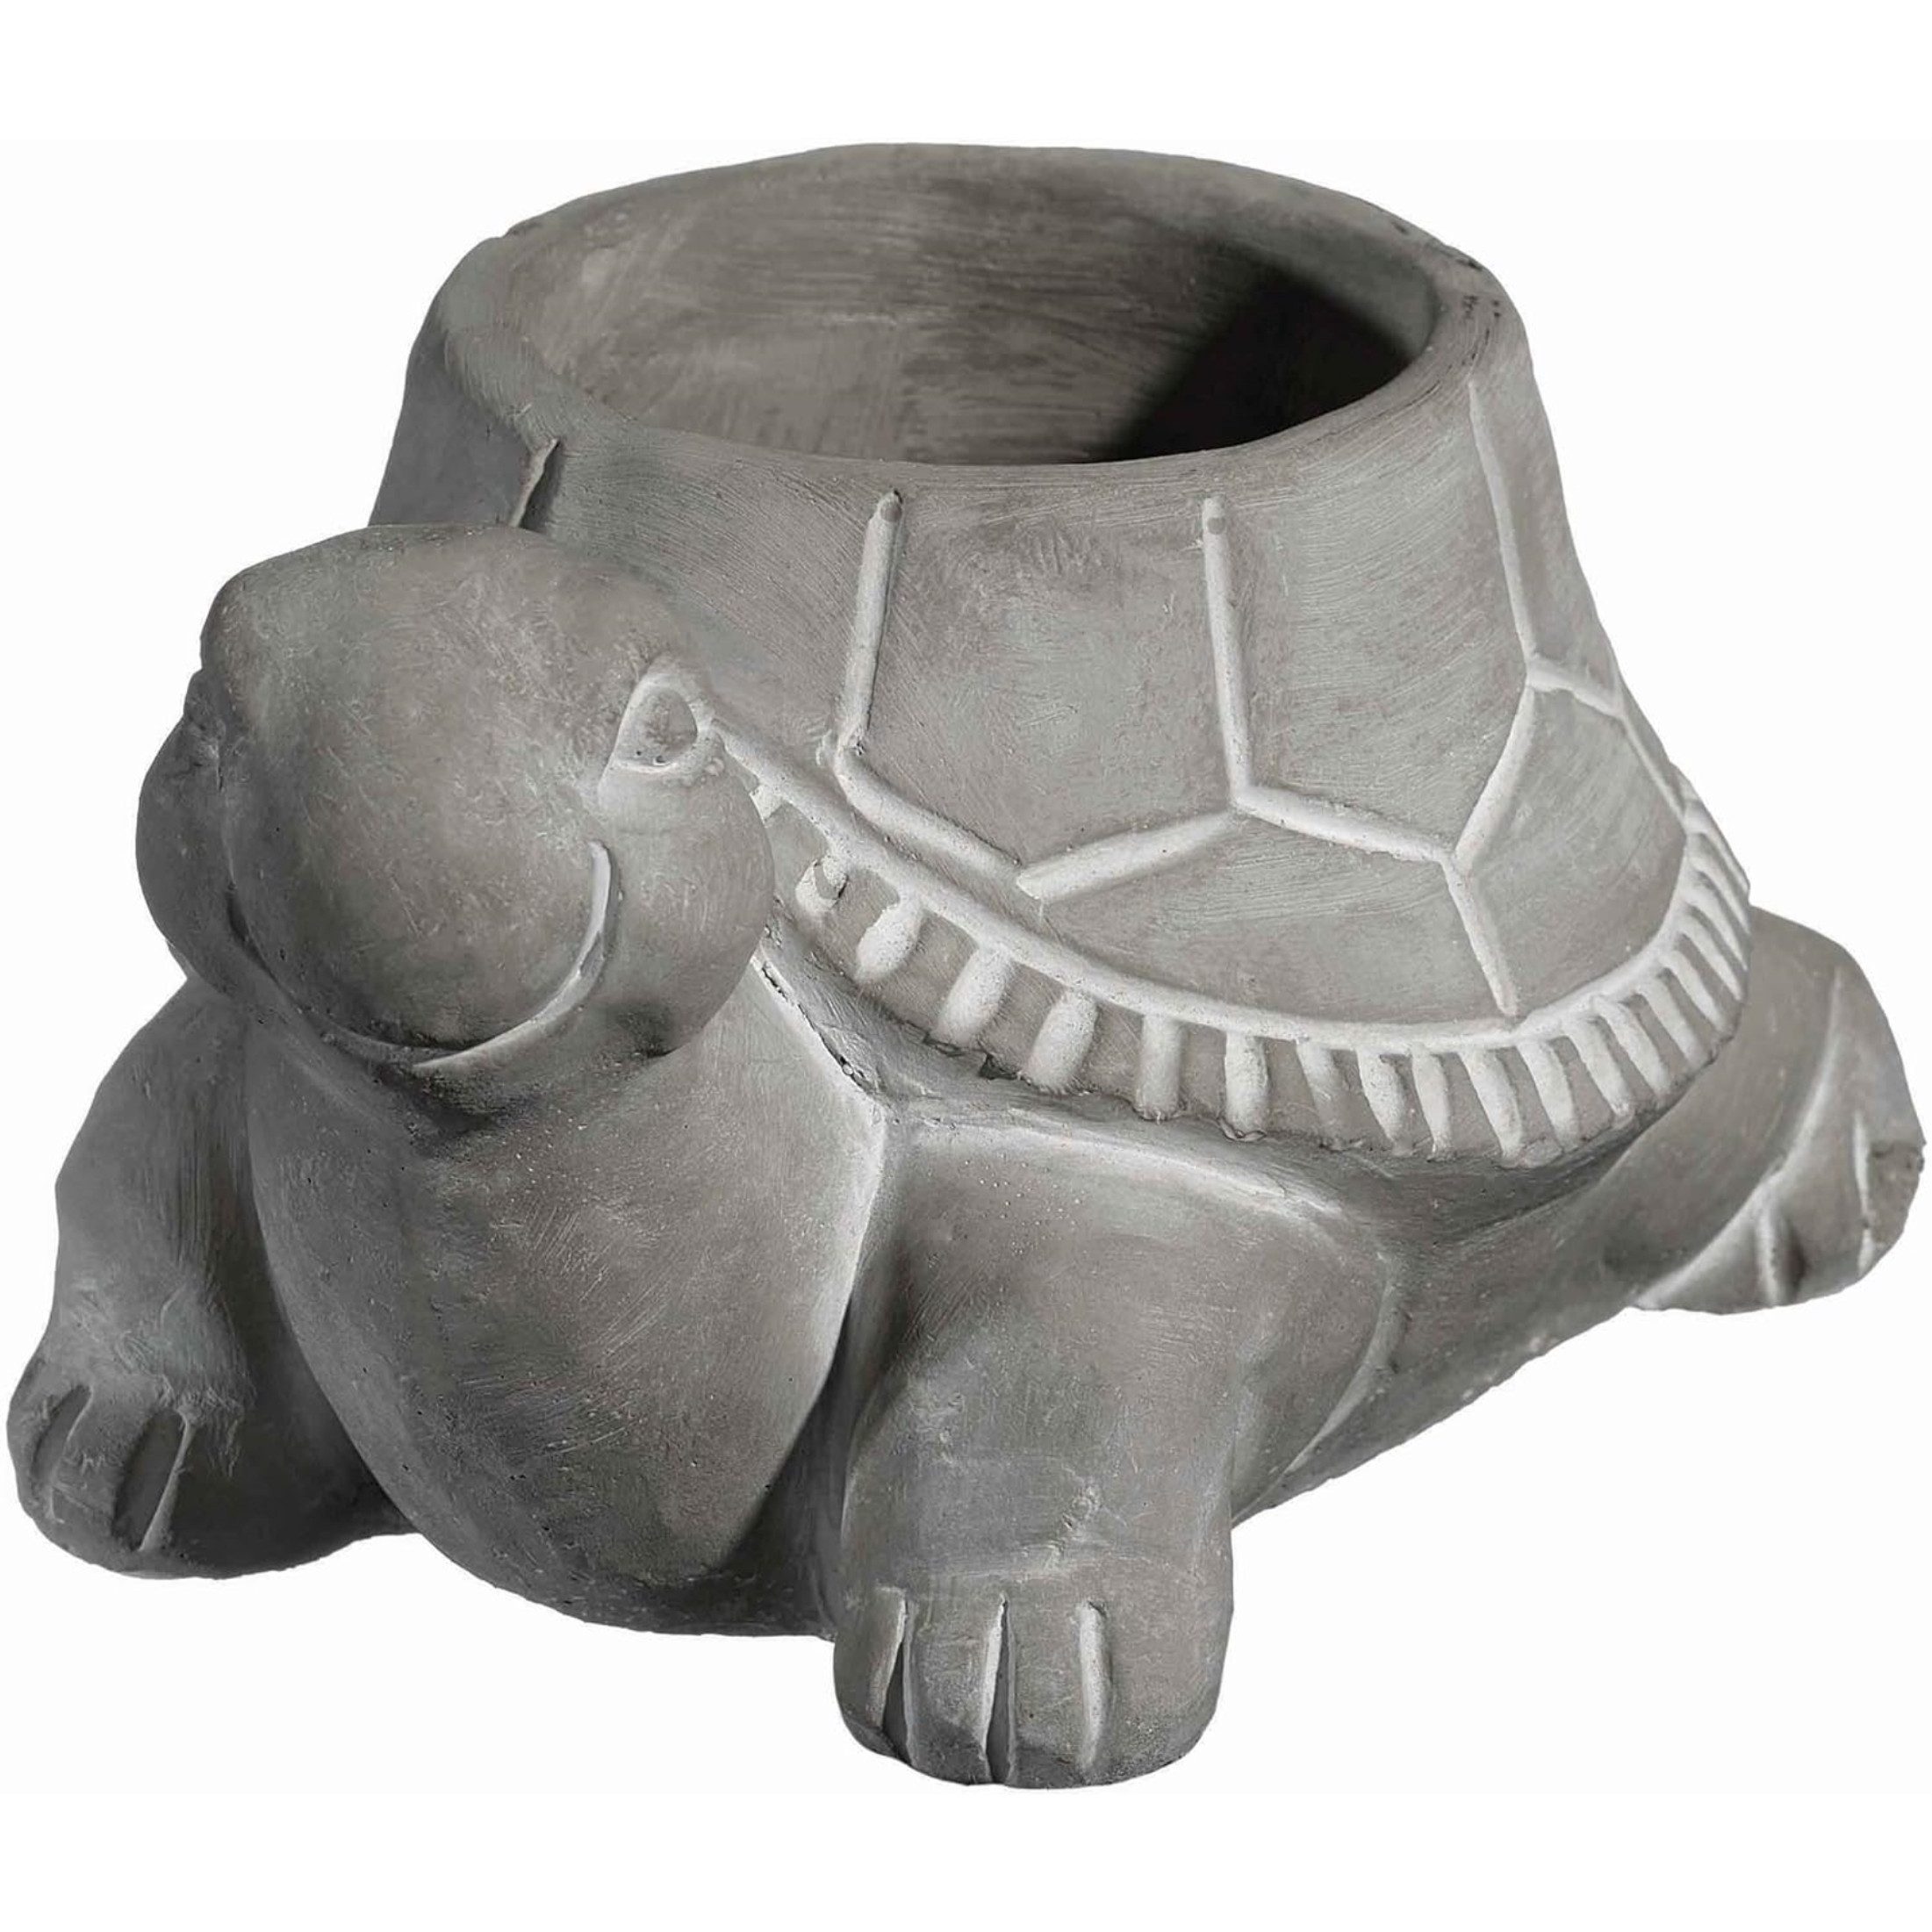 Classic Home and Garden Cement Buddies Indoor Outdoor Turtle Planter with Drainage Hole